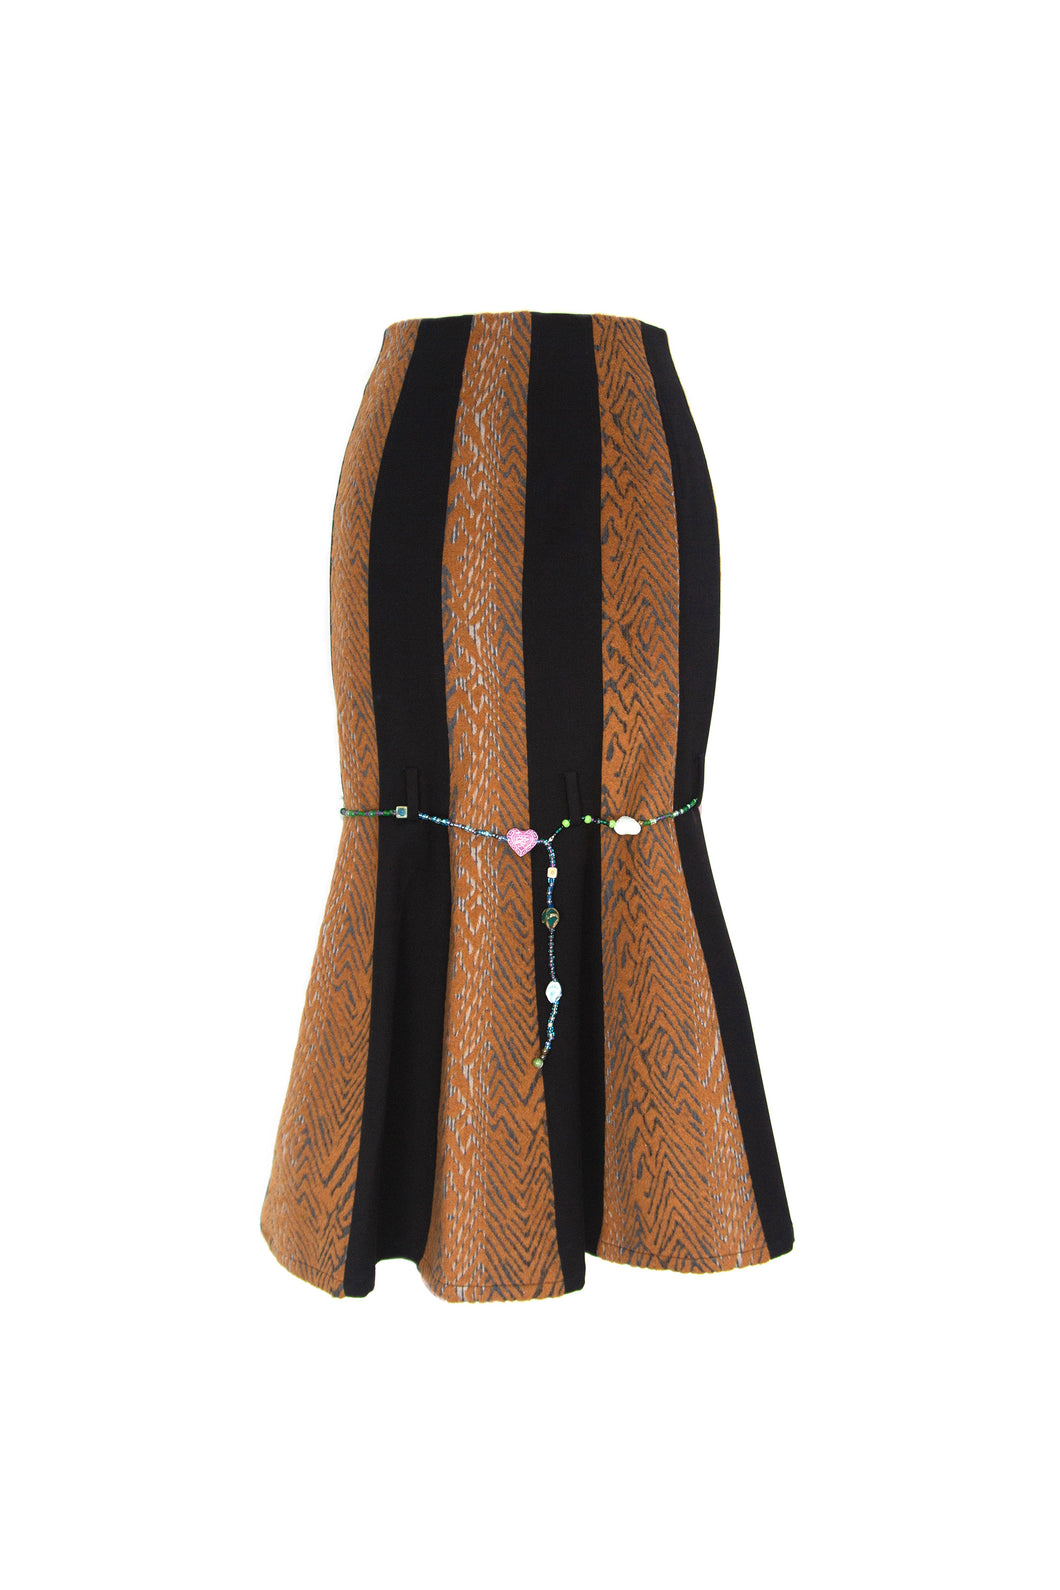 PATCHED SKIRT WITH BEADS BELT